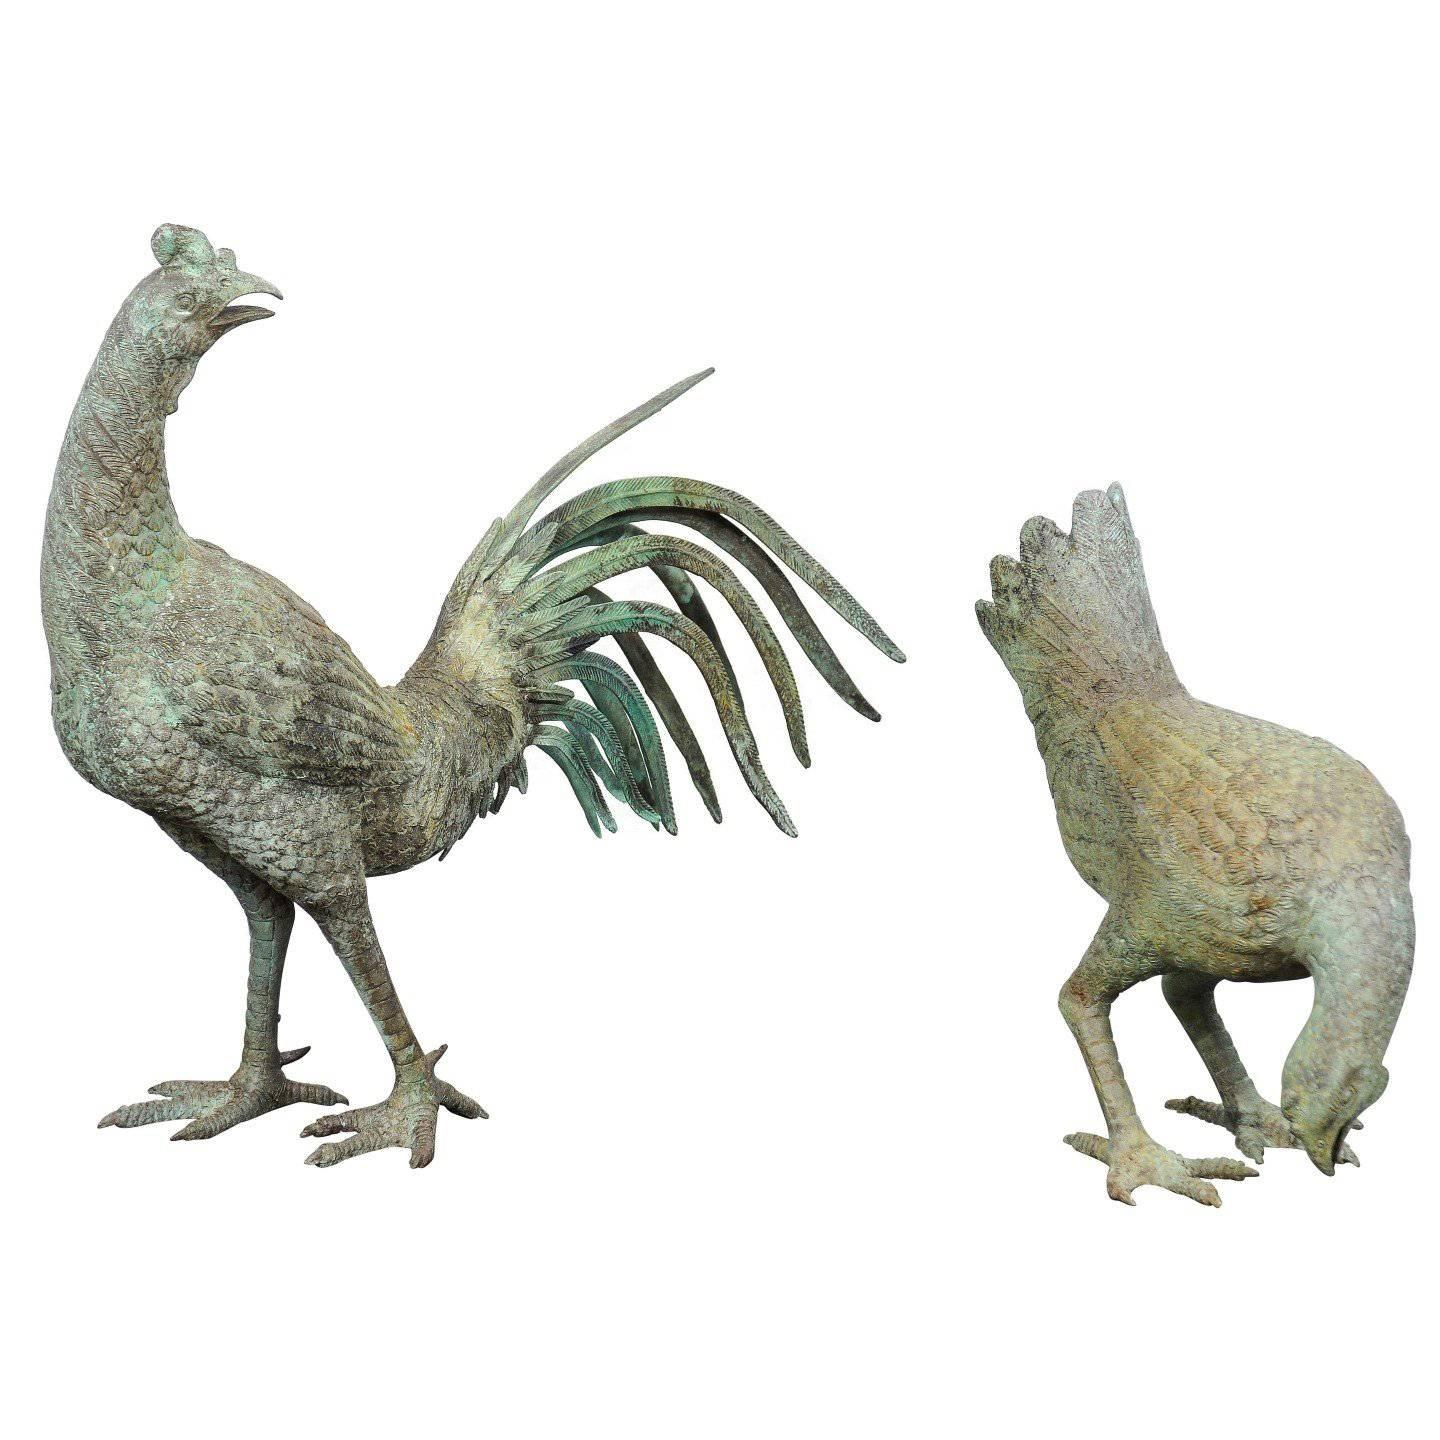 Pair of Italian Bronze Rooster and Hen Sculptures from the Mid-20th Century